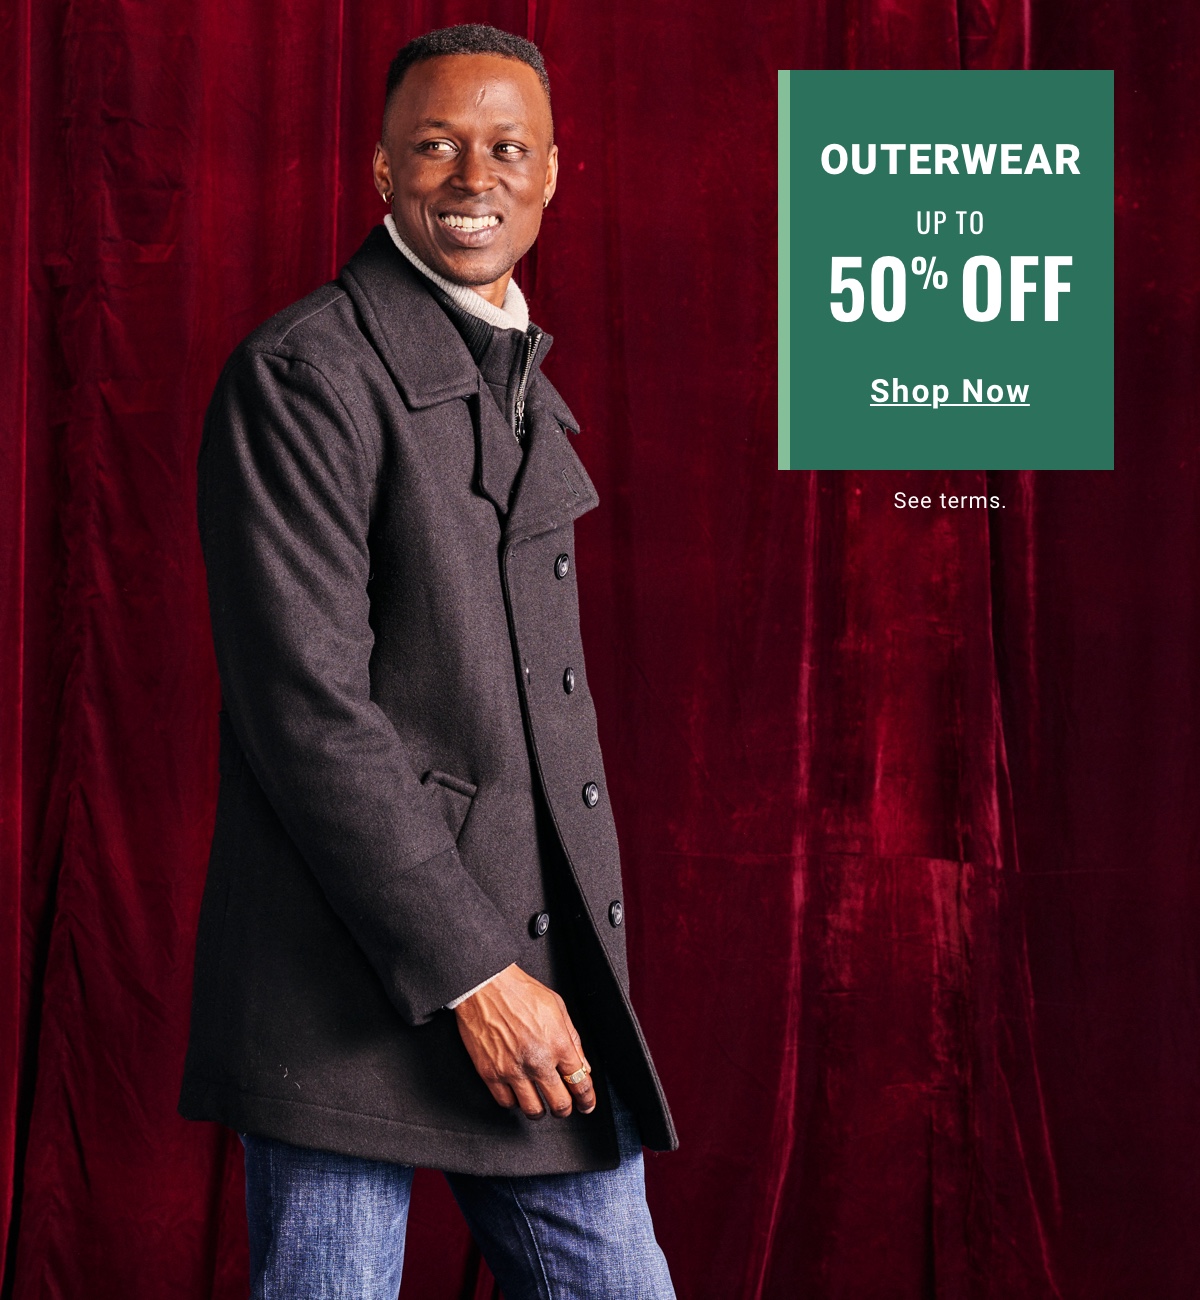 Outerwear Up to 50% Off - Shop Now 